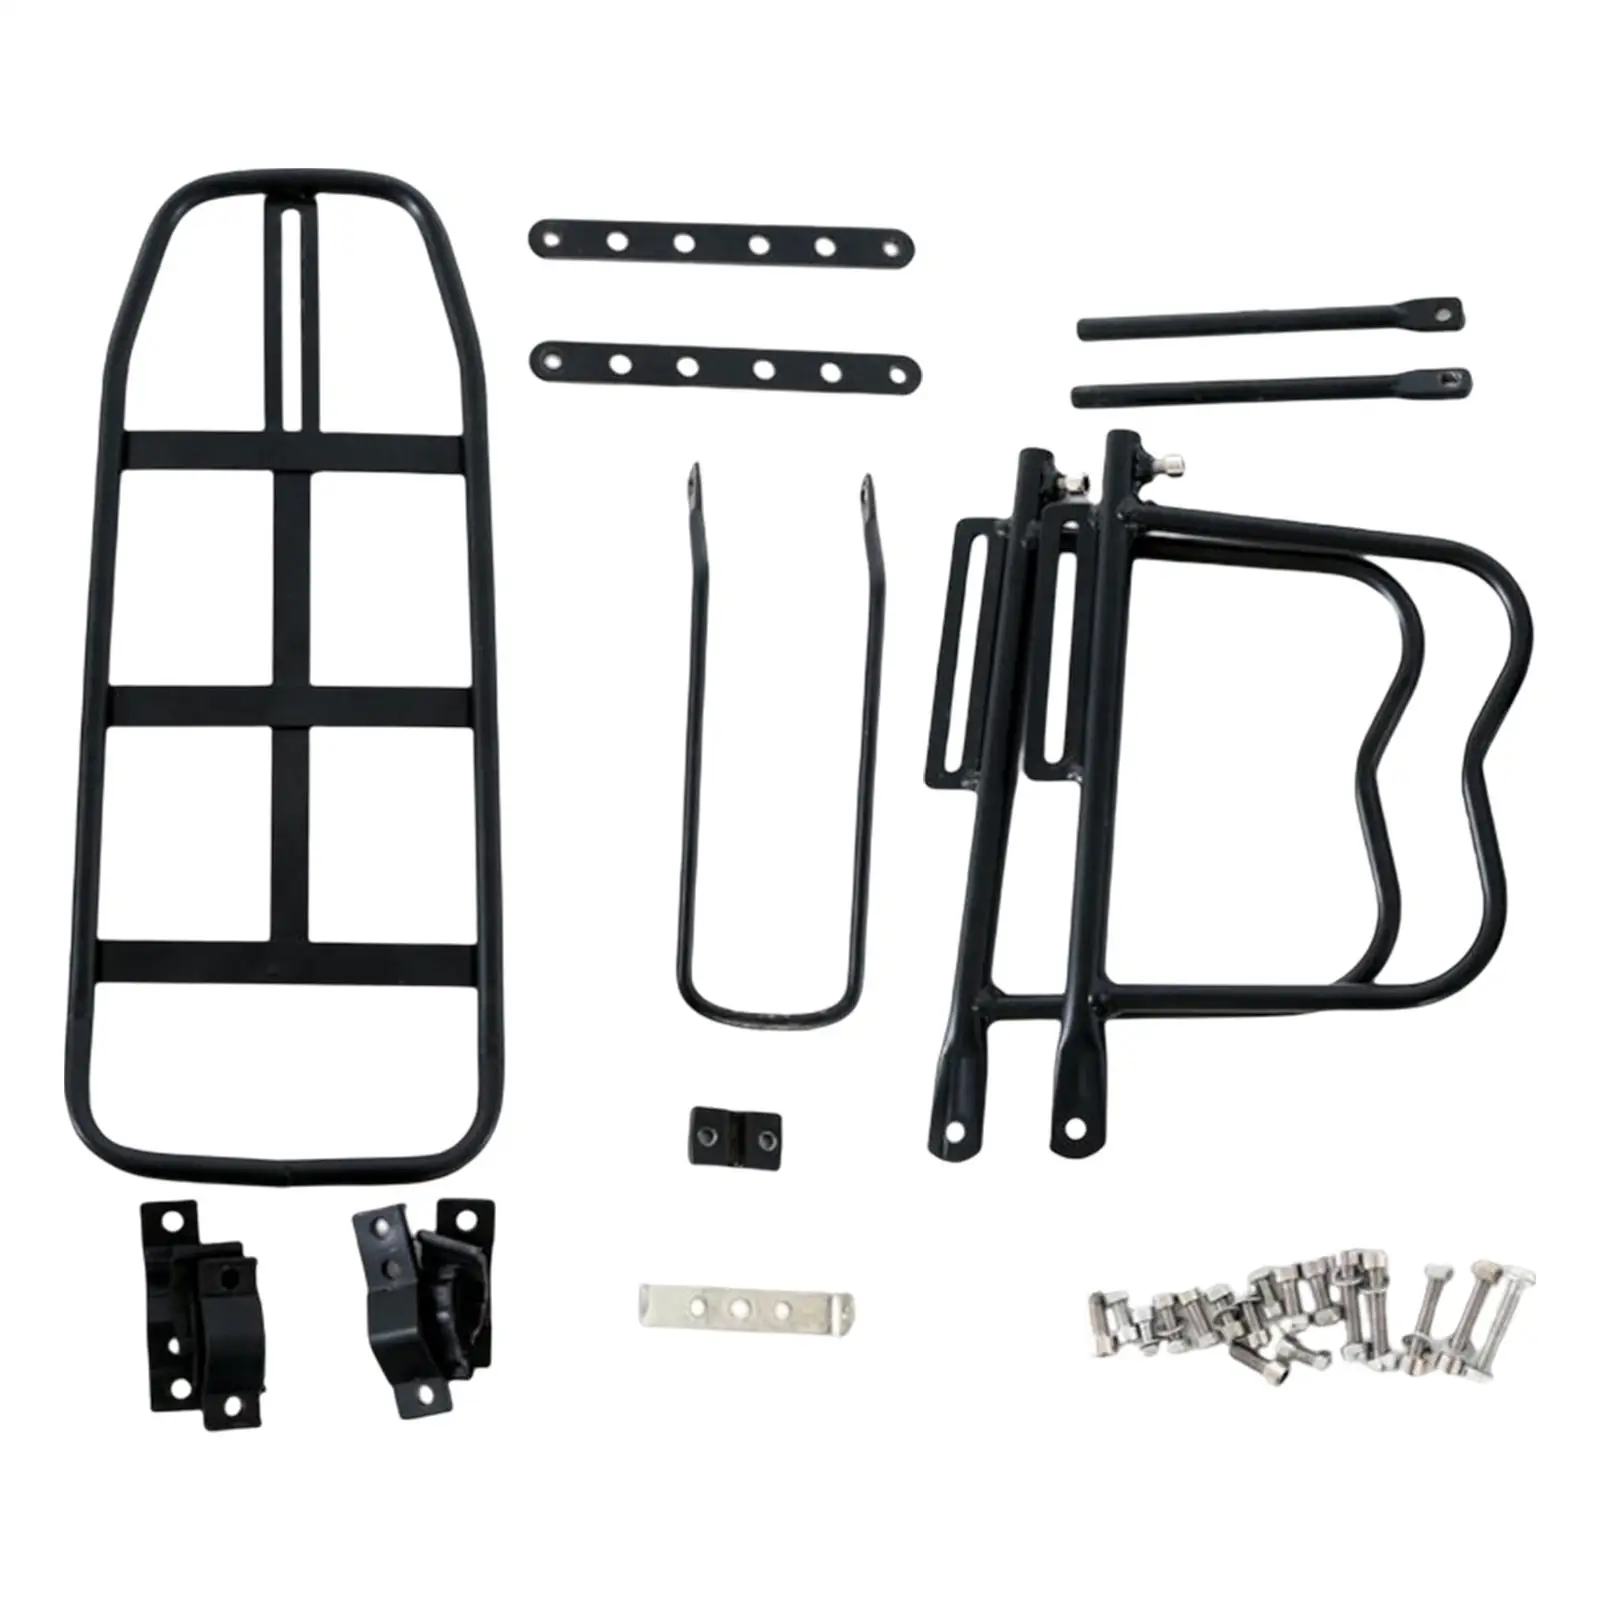 Mountain Bike Bike Rear Cargo Rack Back Seat Accs Easy to Install Lightweighted